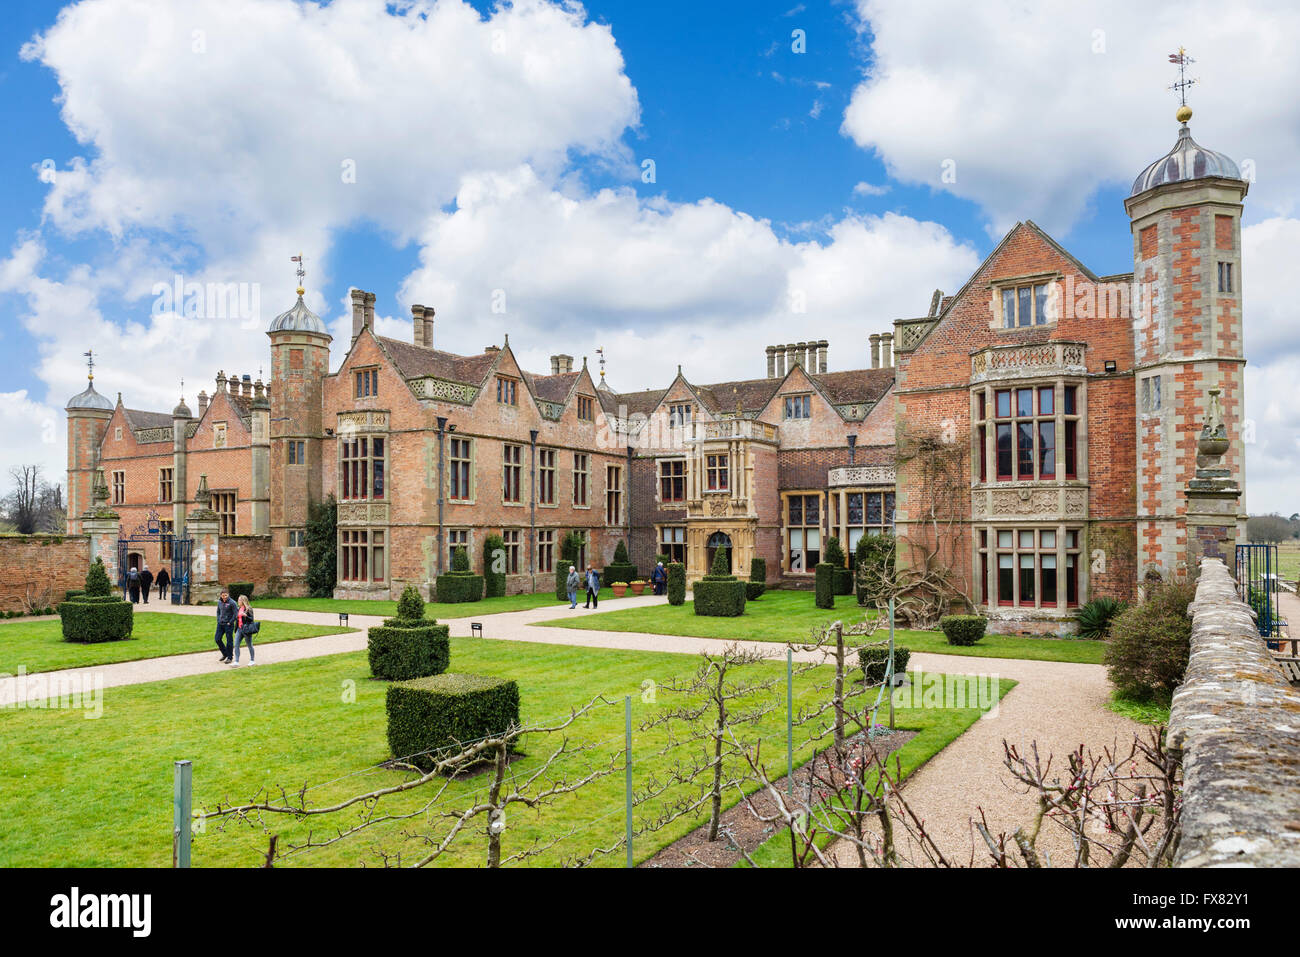 Charlecote Park, a manor house near Stratford-upon-Avon dating from the 16thC, Warwickshire, England, UK Stock Photo